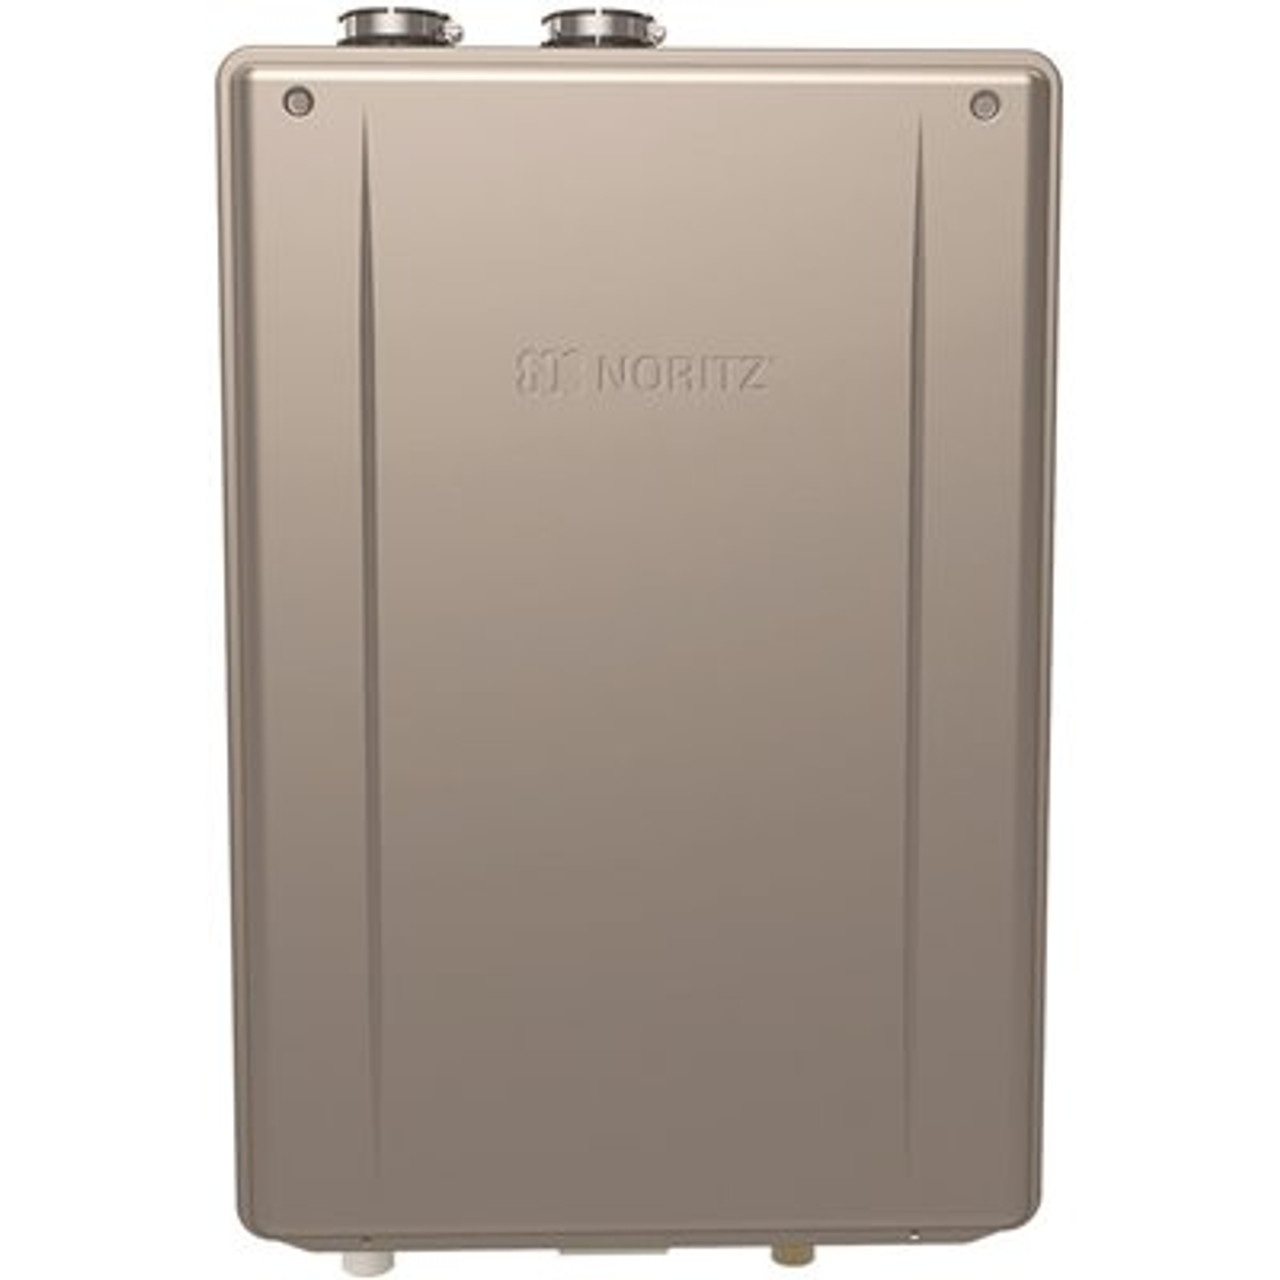 Noritz 11.1 Gpm 199,900 Btu Condensing Direct Vent Commercial Natural Gas Tankless Water Heater